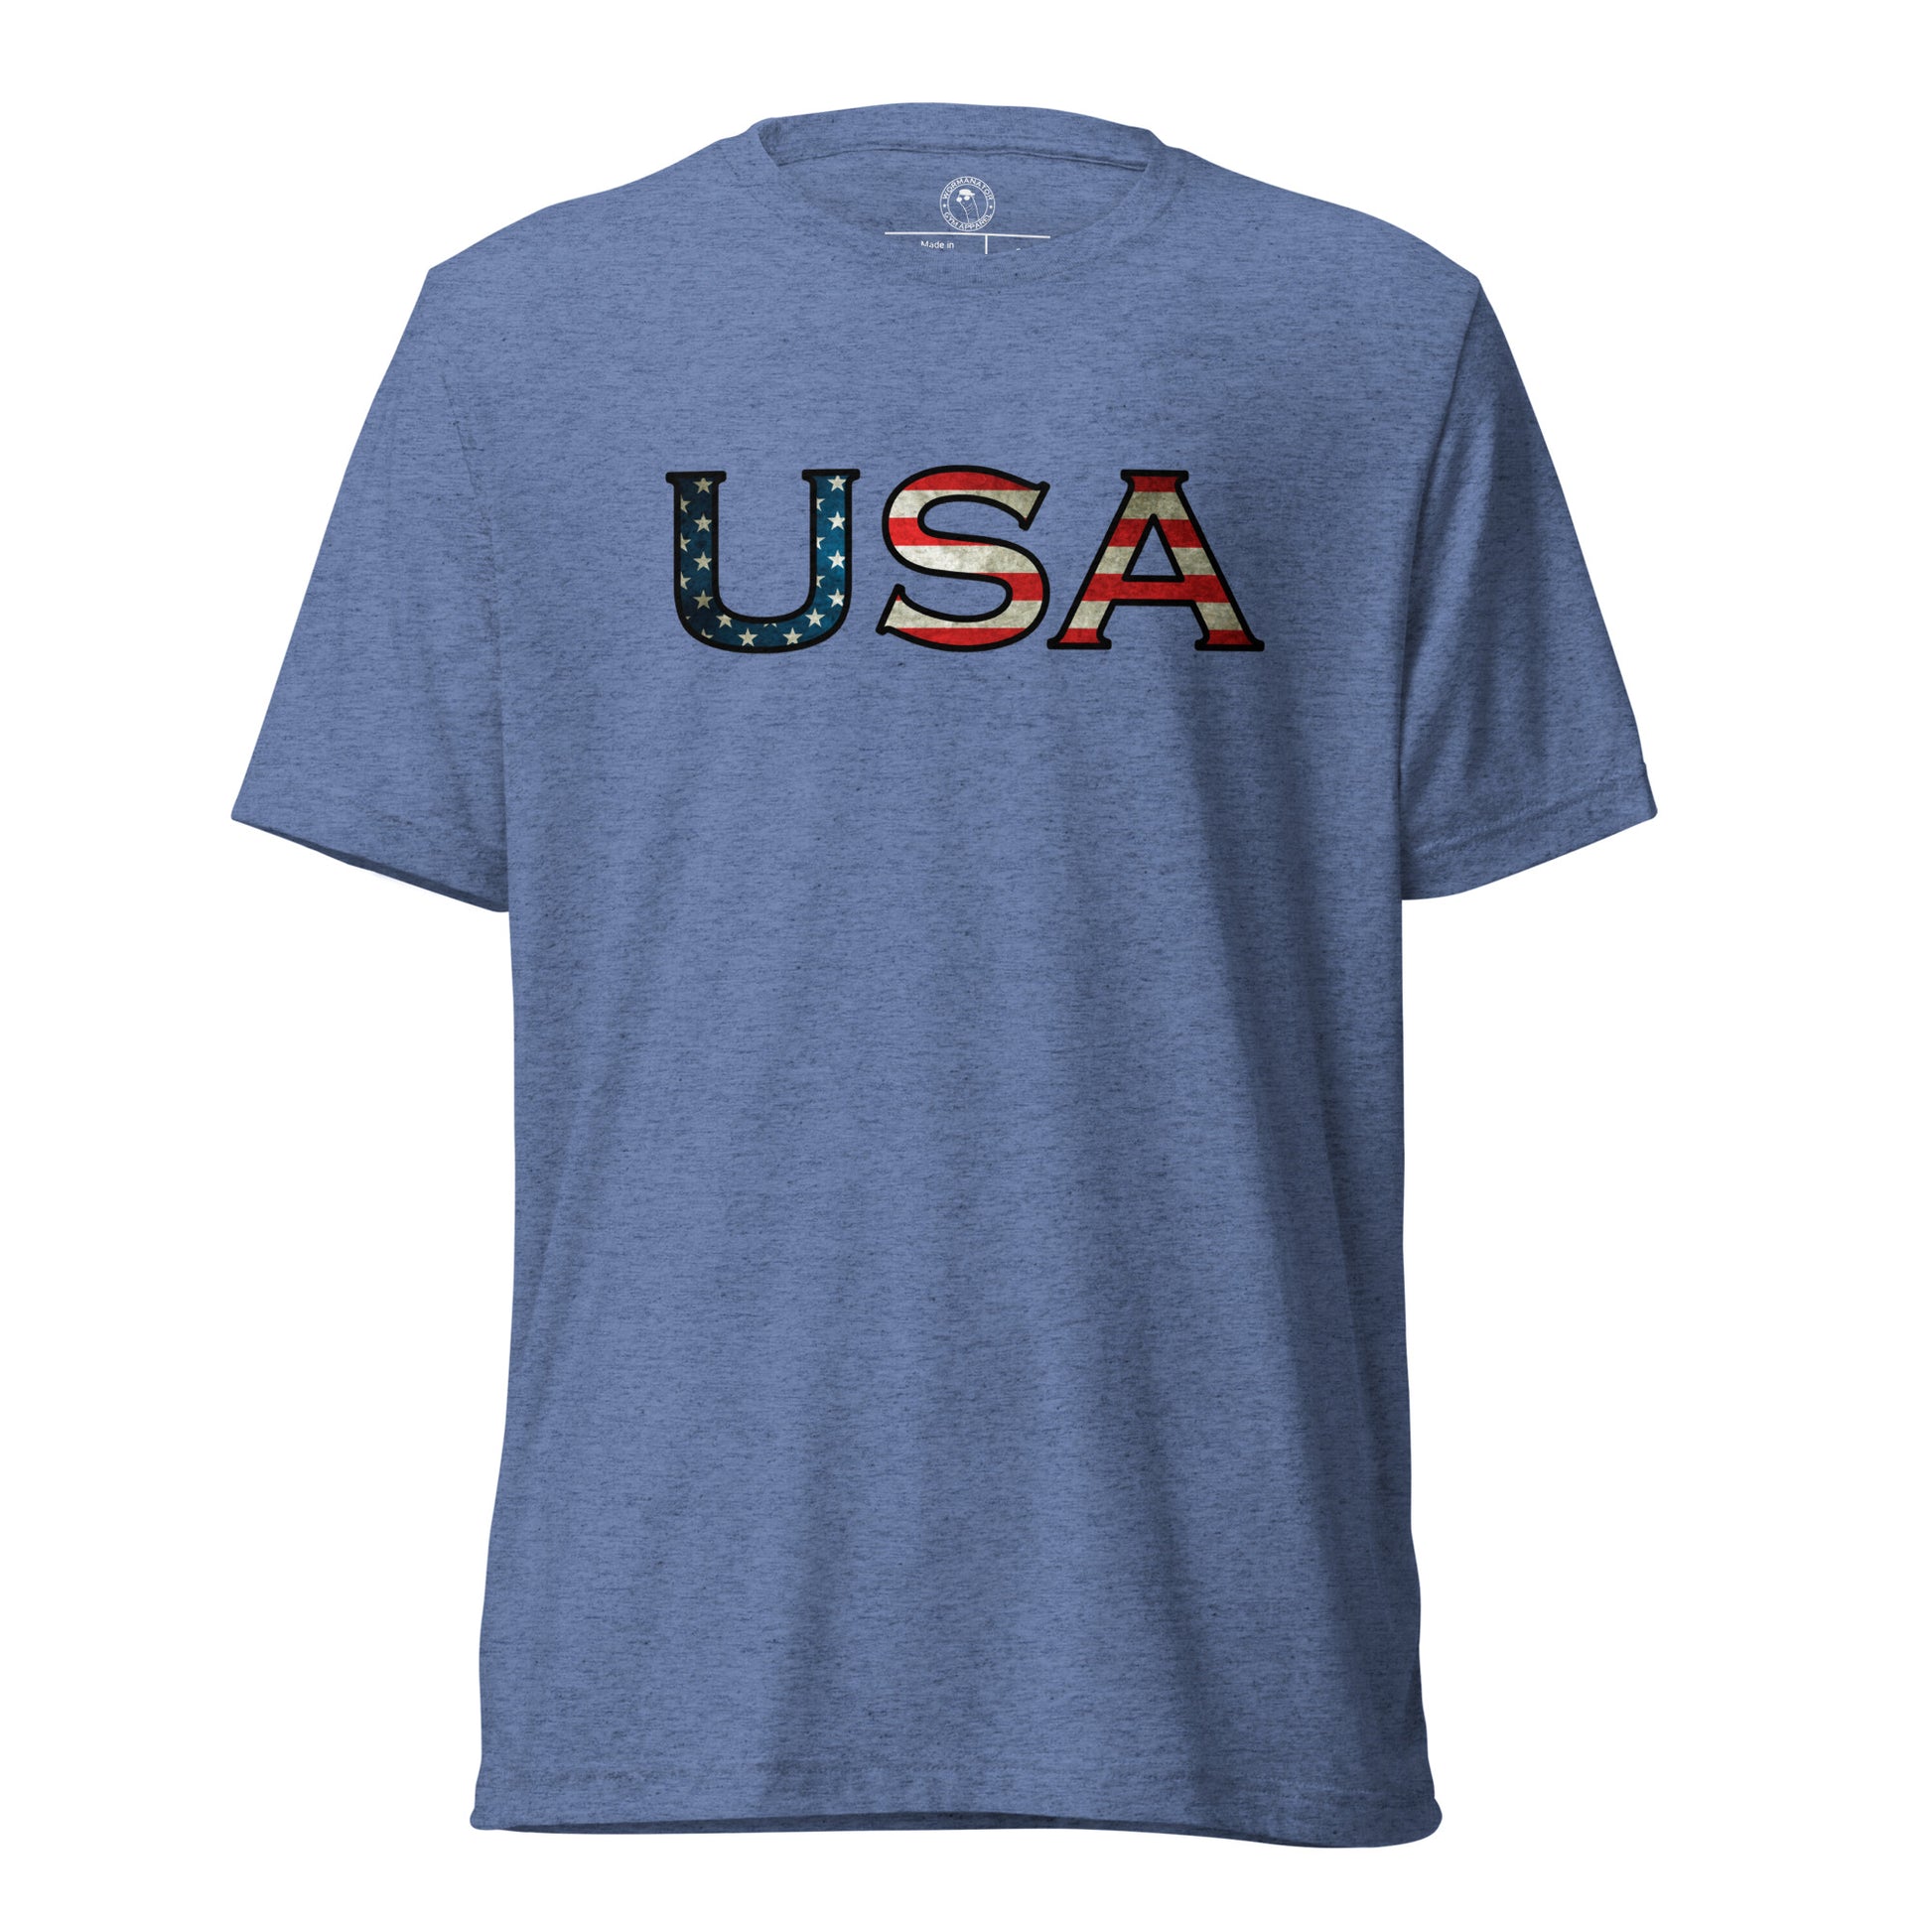 USA T-Shirt in Blue Triblend